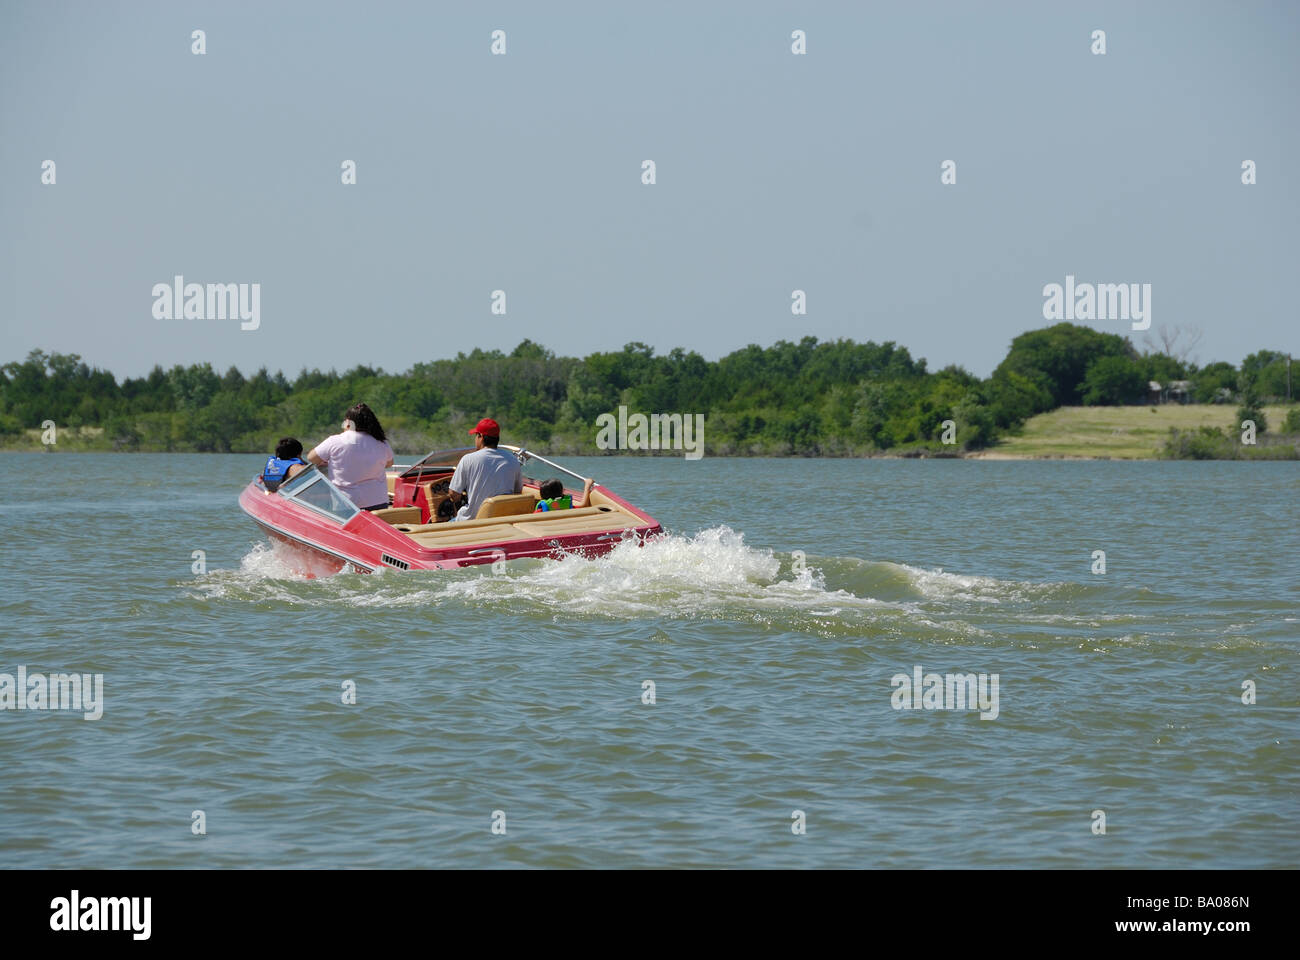 A family of four enjoying a day of boating on an area lake Stock Photo